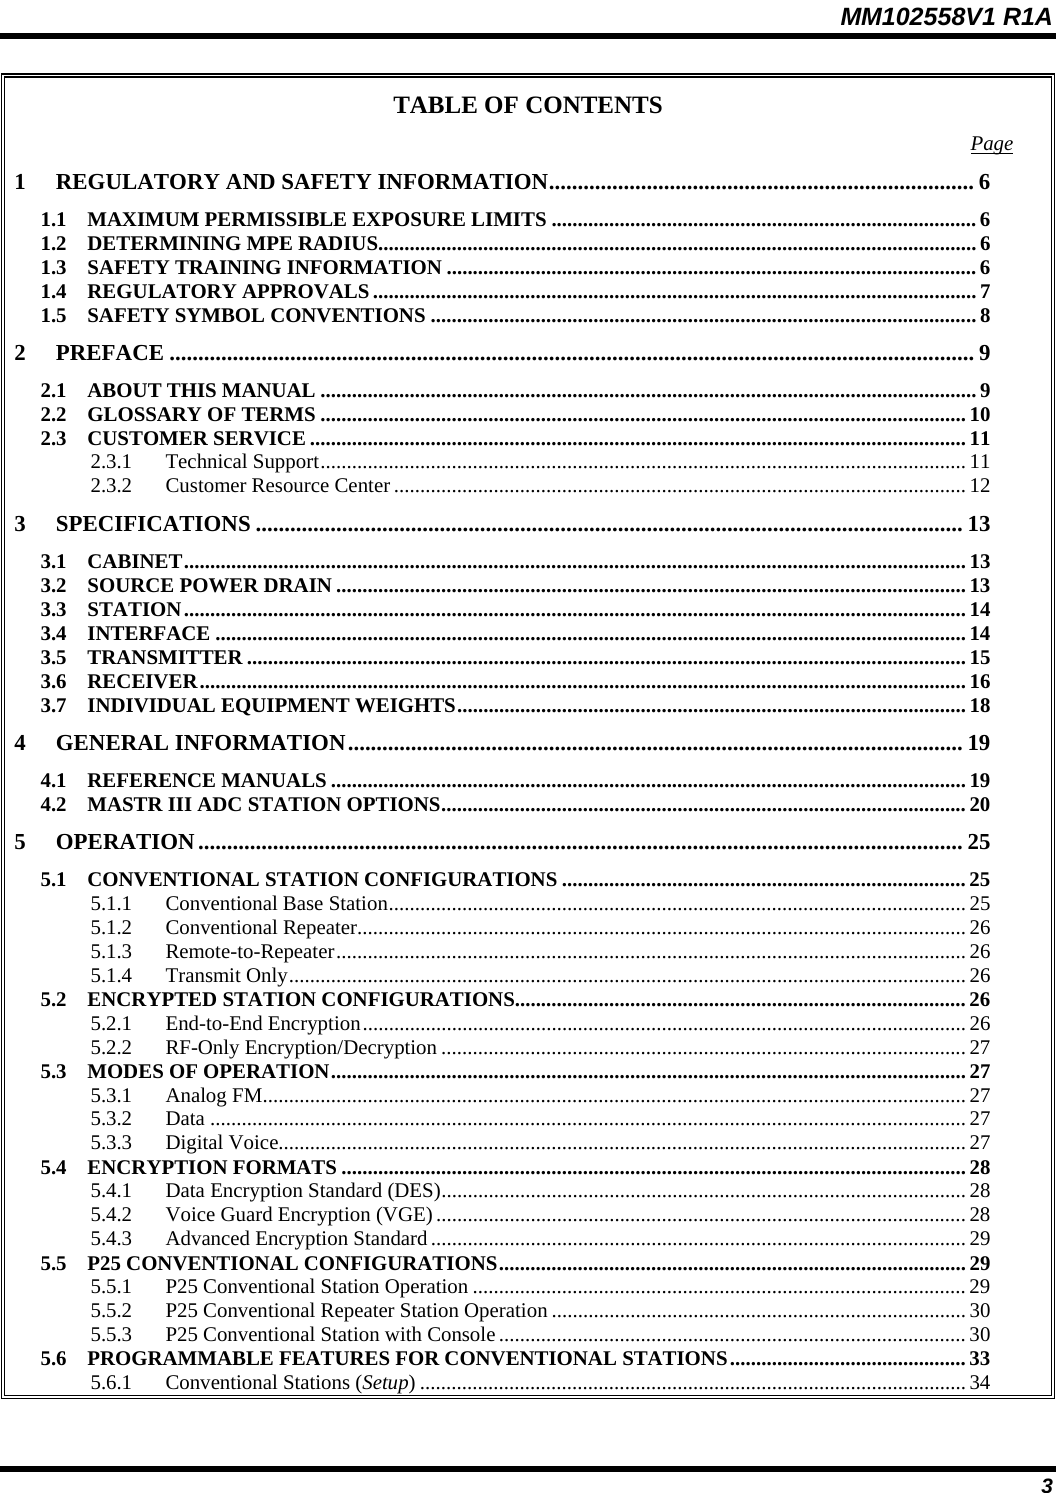 MM102558V1 R1A TABLE OF CONTENTS  Page1 REGULATORY AND SAFETY INFORMATION.......................................................................... 6 1.1 MAXIMUM PERMISSIBLE EXPOSURE LIMITS .................................................................................6 1.2 DETERMINING MPE RADIUS.................................................................................................................. 6 1.3 SAFETY TRAINING INFORMATION .....................................................................................................6 1.4 REGULATORY APPROVALS................................................................................................................... 7 1.5 SAFETY SYMBOL CONVENTIONS ........................................................................................................ 8 2 PREFACE ............................................................................................................................................ 9 2.1 ABOUT THIS MANUAL .............................................................................................................................9 2.2 GLOSSARY OF TERMS ........................................................................................................................... 10 2.3 CUSTOMER SERVICE ............................................................................................................................. 11 2.3.1 Technical Support........................................................................................................................... 11 2.3.2 Customer Resource Center............................................................................................................. 12 3 SPECIFICATIONS ........................................................................................................................... 13 3.1 CABINET..................................................................................................................................................... 13 3.2 SOURCE POWER DRAIN ........................................................................................................................ 13 3.3 STATION..................................................................................................................................................... 14 3.4 INTERFACE ............................................................................................................................................... 14 3.5 TRANSMITTER ......................................................................................................................................... 15 3.6 RECEIVER.................................................................................................................................................. 16 3.7 INDIVIDUAL EQUIPMENT WEIGHTS................................................................................................. 18 4 GENERAL INFORMATION........................................................................................................... 19 4.1 REFERENCE MANUALS ......................................................................................................................... 19 4.2 MASTR III ADC STATION OPTIONS.................................................................................................... 20 5 OPERATION..................................................................................................................................... 25 5.1 CONVENTIONAL STATION CONFIGURATIONS ............................................................................. 25 5.1.1 Conventional Base Station.............................................................................................................. 25 5.1.2 Conventional Repeater.................................................................................................................... 26 5.1.3 Remote-to-Repeater........................................................................................................................ 26 5.1.4 Transmit Only................................................................................................................................. 26 5.2 ENCRYPTED STATION CONFIGURATIONS...................................................................................... 26 5.2.1 End-to-End Encryption................................................................................................................... 26 5.2.2 RF-Only Encryption/Decryption .................................................................................................... 27 5.3 MODES OF OPERATION......................................................................................................................... 27 5.3.1 Analog FM...................................................................................................................................... 27 5.3.2 Data ................................................................................................................................................ 27 5.3.3 Digital Voice................................................................................................................................... 27 5.4 ENCRYPTION FORMATS ....................................................................................................................... 28 5.4.1 Data Encryption Standard (DES).................................................................................................... 28 5.4.2 Voice Guard Encryption (VGE)..................................................................................................... 28 5.4.3 Advanced Encryption Standard ...................................................................................................... 29 5.5 P25 CONVENTIONAL CONFIGURATIONS......................................................................................... 29 5.5.1 P25 Conventional Station Operation ..............................................................................................29 5.5.2 P25 Conventional Repeater Station Operation ............................................................................... 30 5.5.3 P25 Conventional Station with Console......................................................................................... 30 5.6 PROGRAMMABLE FEATURES FOR CONVENTIONAL STATIONS.............................................33 5.6.1 Conventional Stations (Setup) ........................................................................................................ 34  3 